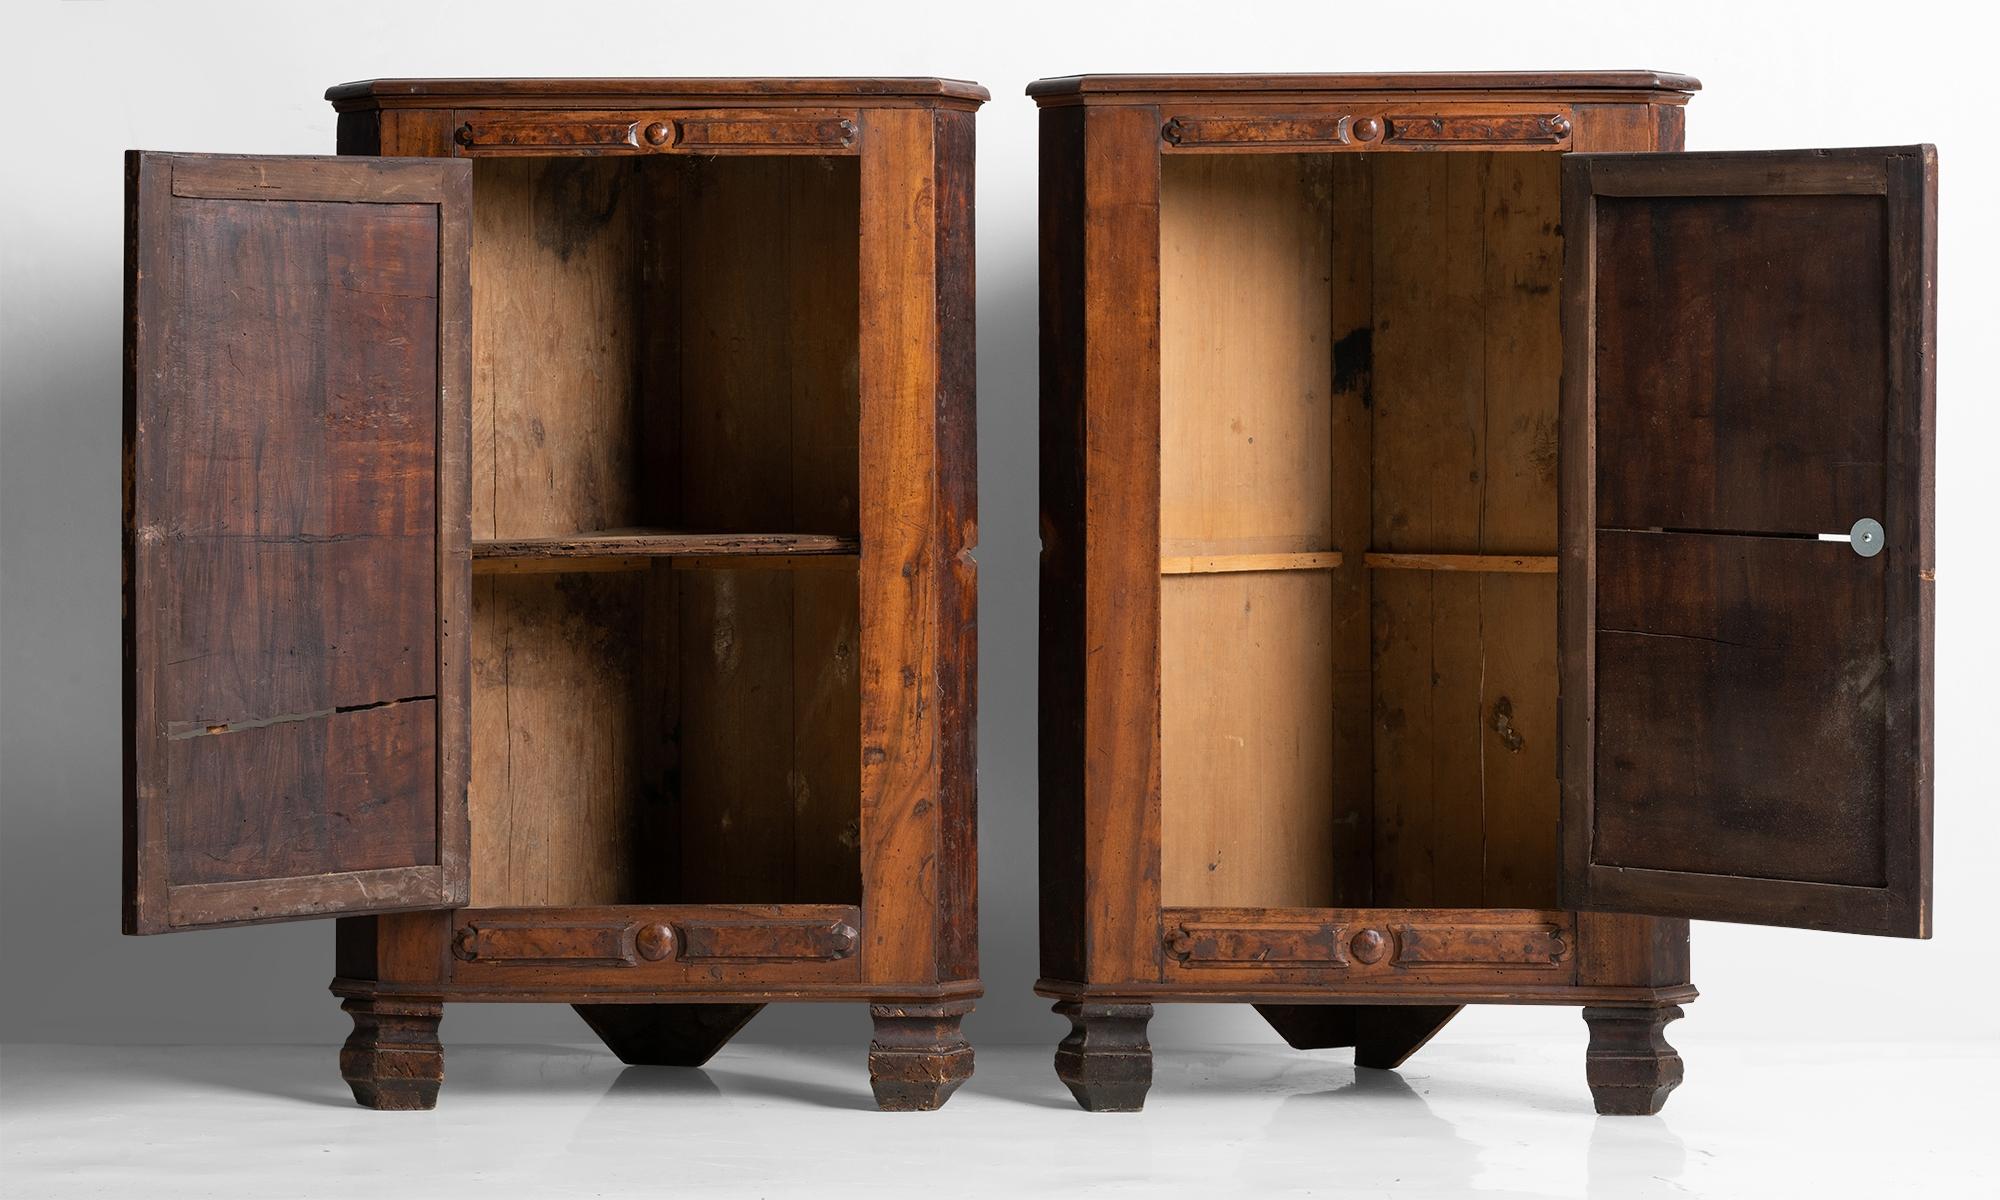 Handcrafted fruitwood corner cabinets with elegant carving.